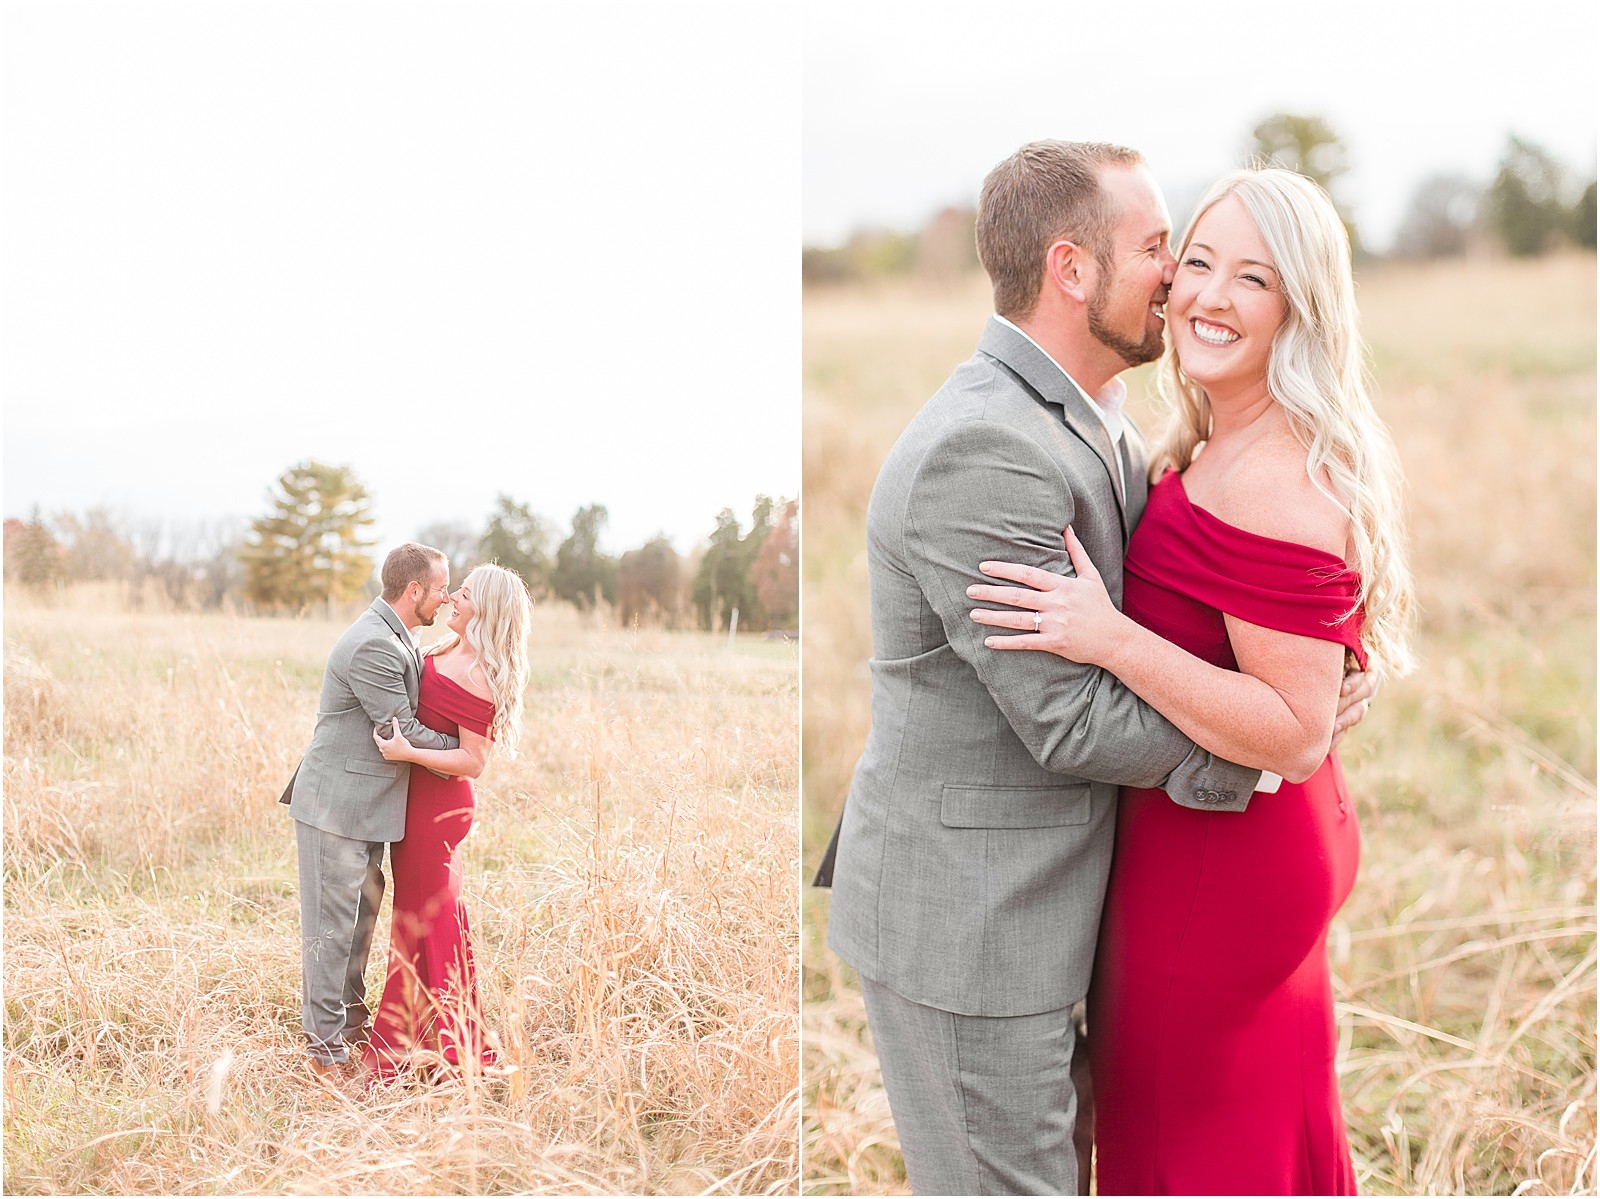 A Perfect Fall Engagement Session at Evansville State Park | Jamie and Max | Bret and Brandie Photography 022.jpg